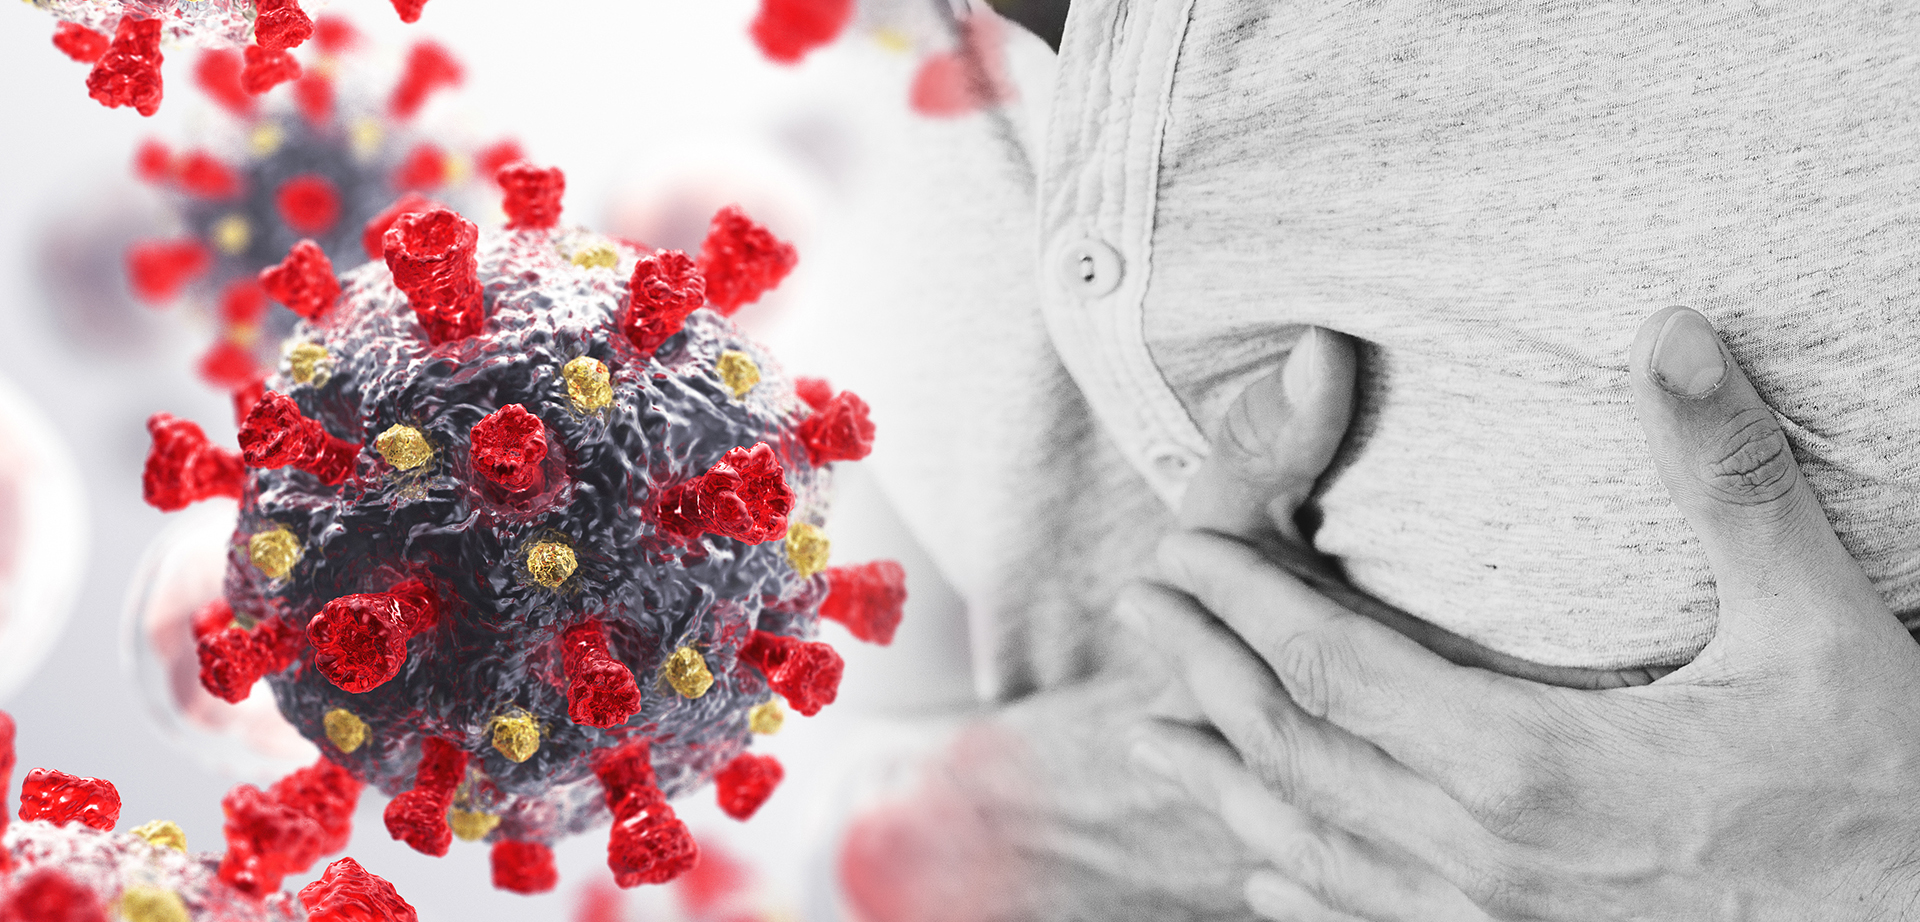 Graphic with 3d render of Coronavirus on left side and photo of male holding chest in distress on right